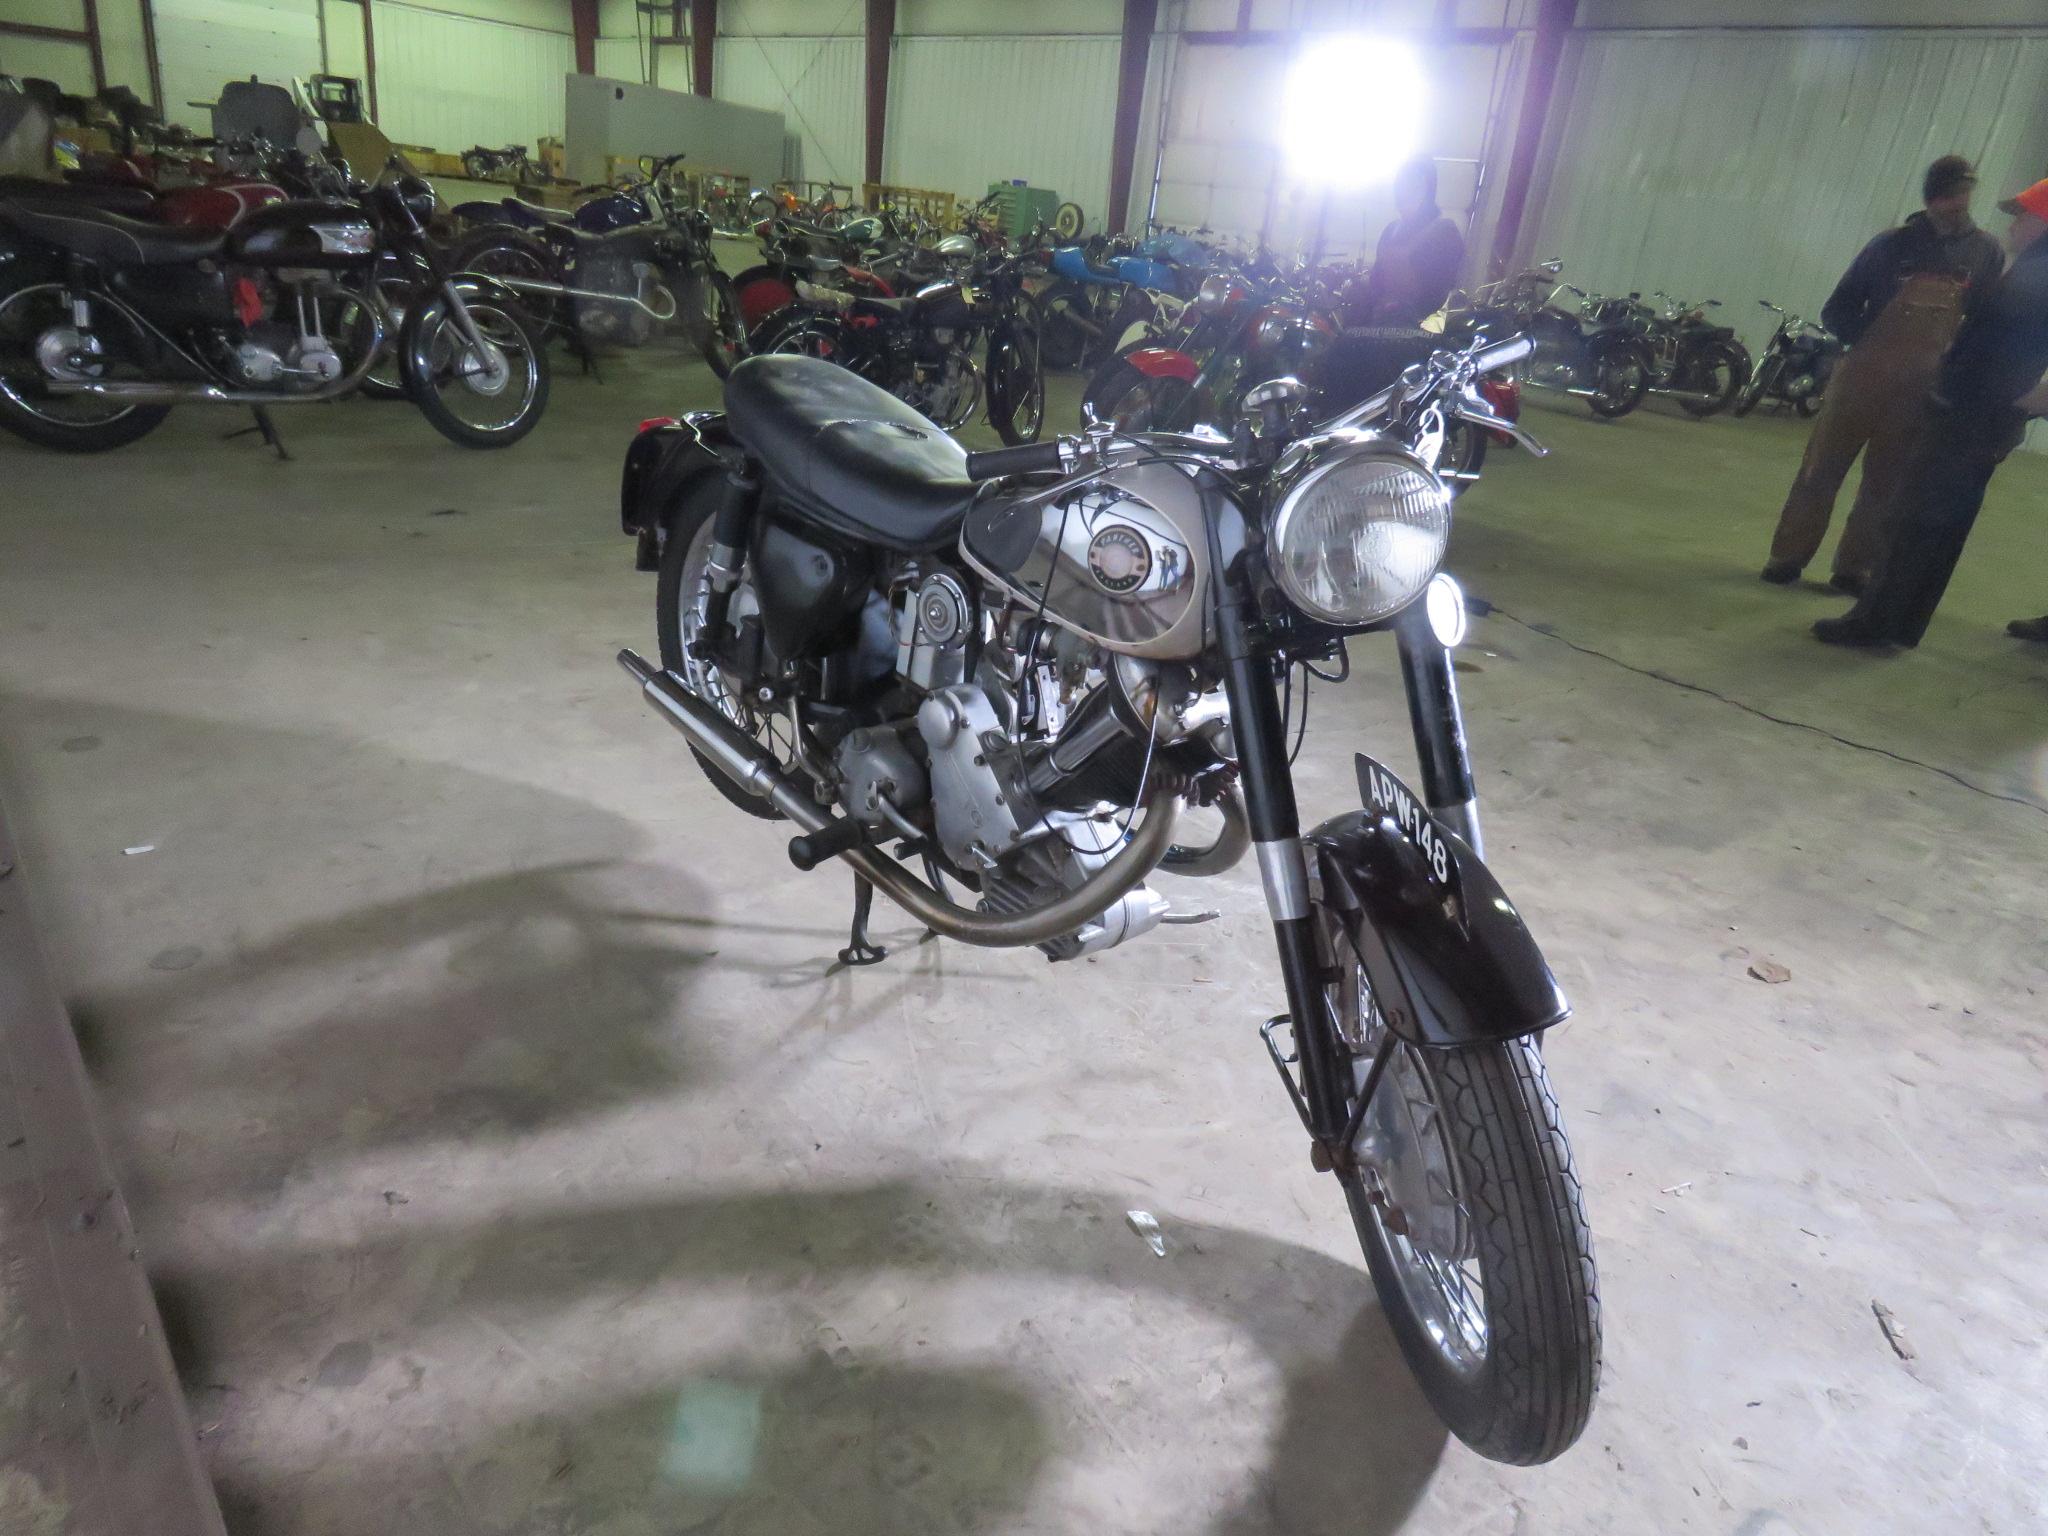 1960 Panther Model 120 Motorcycle